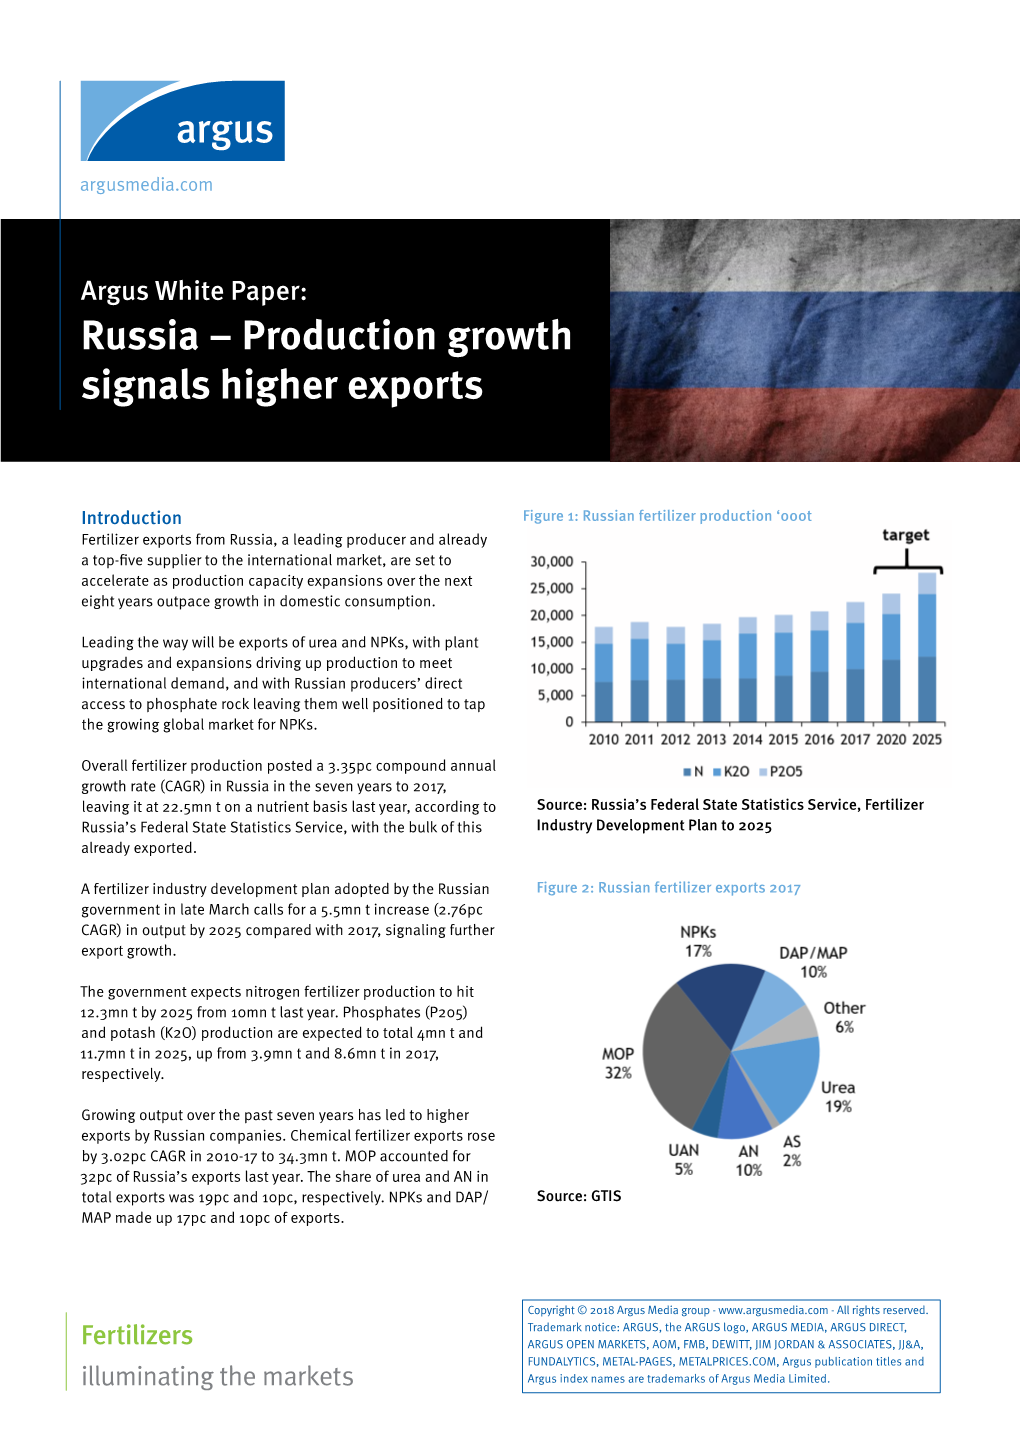 Russia – Production Growth Signals Higher Exports